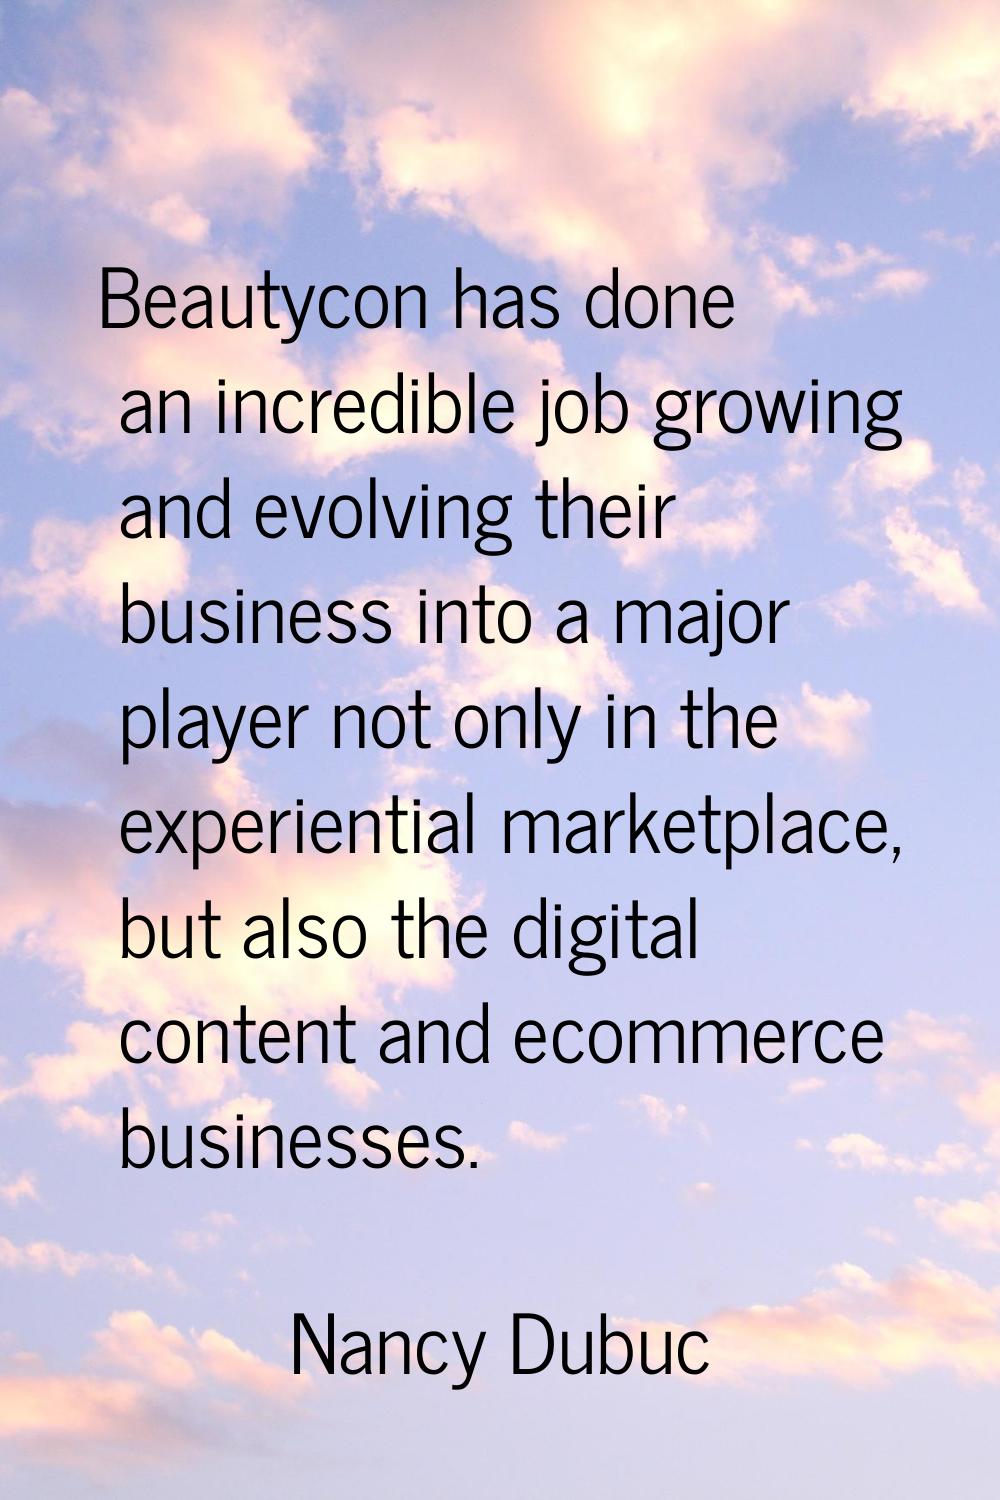 Beautycon has done an incredible job growing and evolving their business into a major player not on